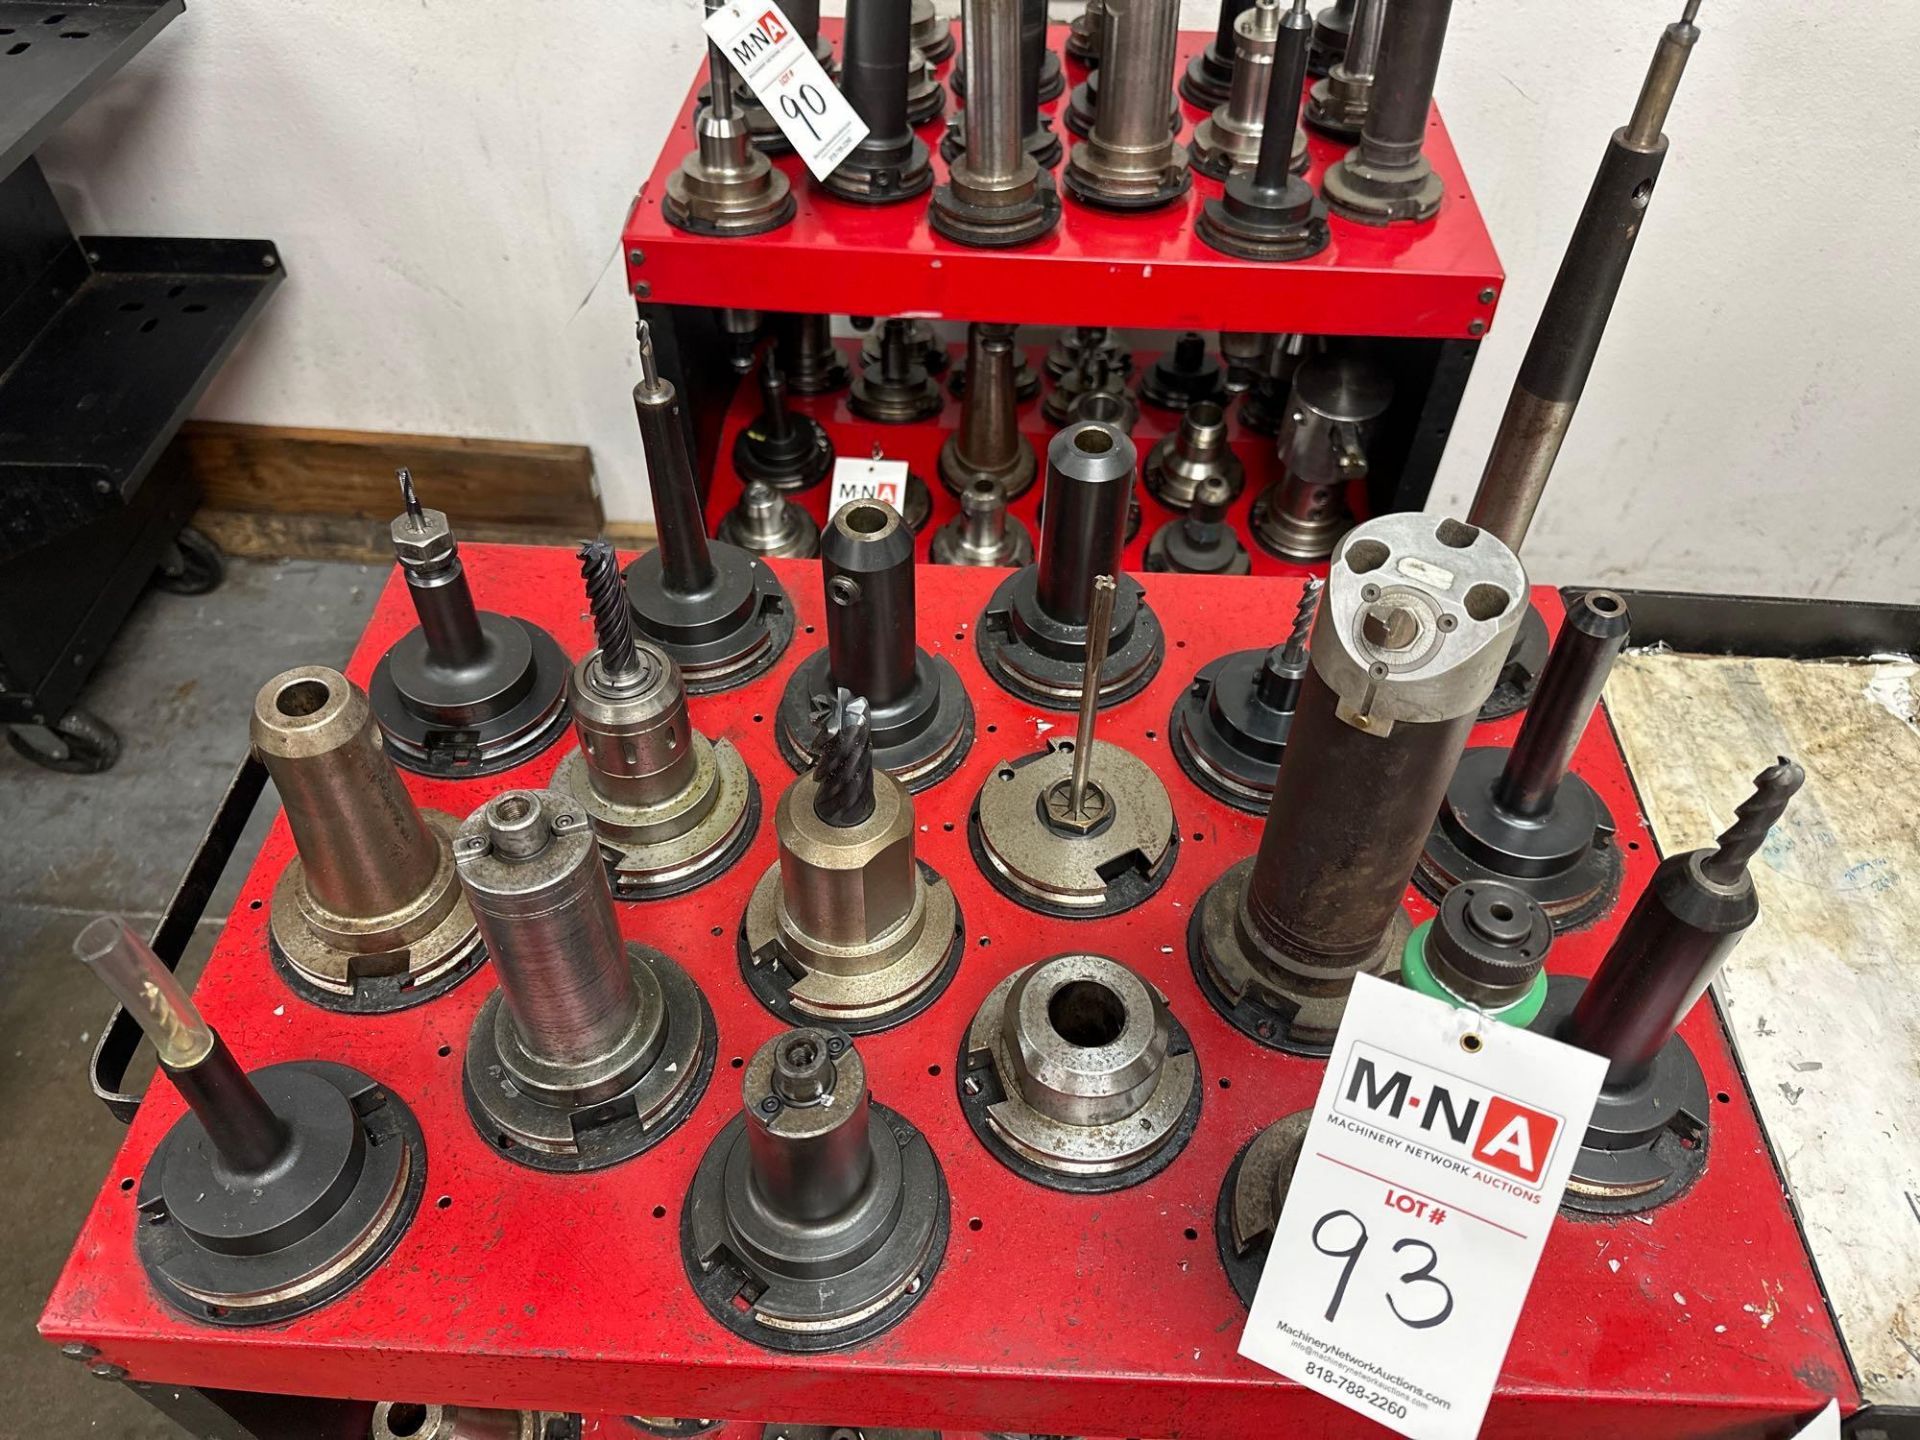 (18) CT50 Tool Holders w/ Assorted Tooling